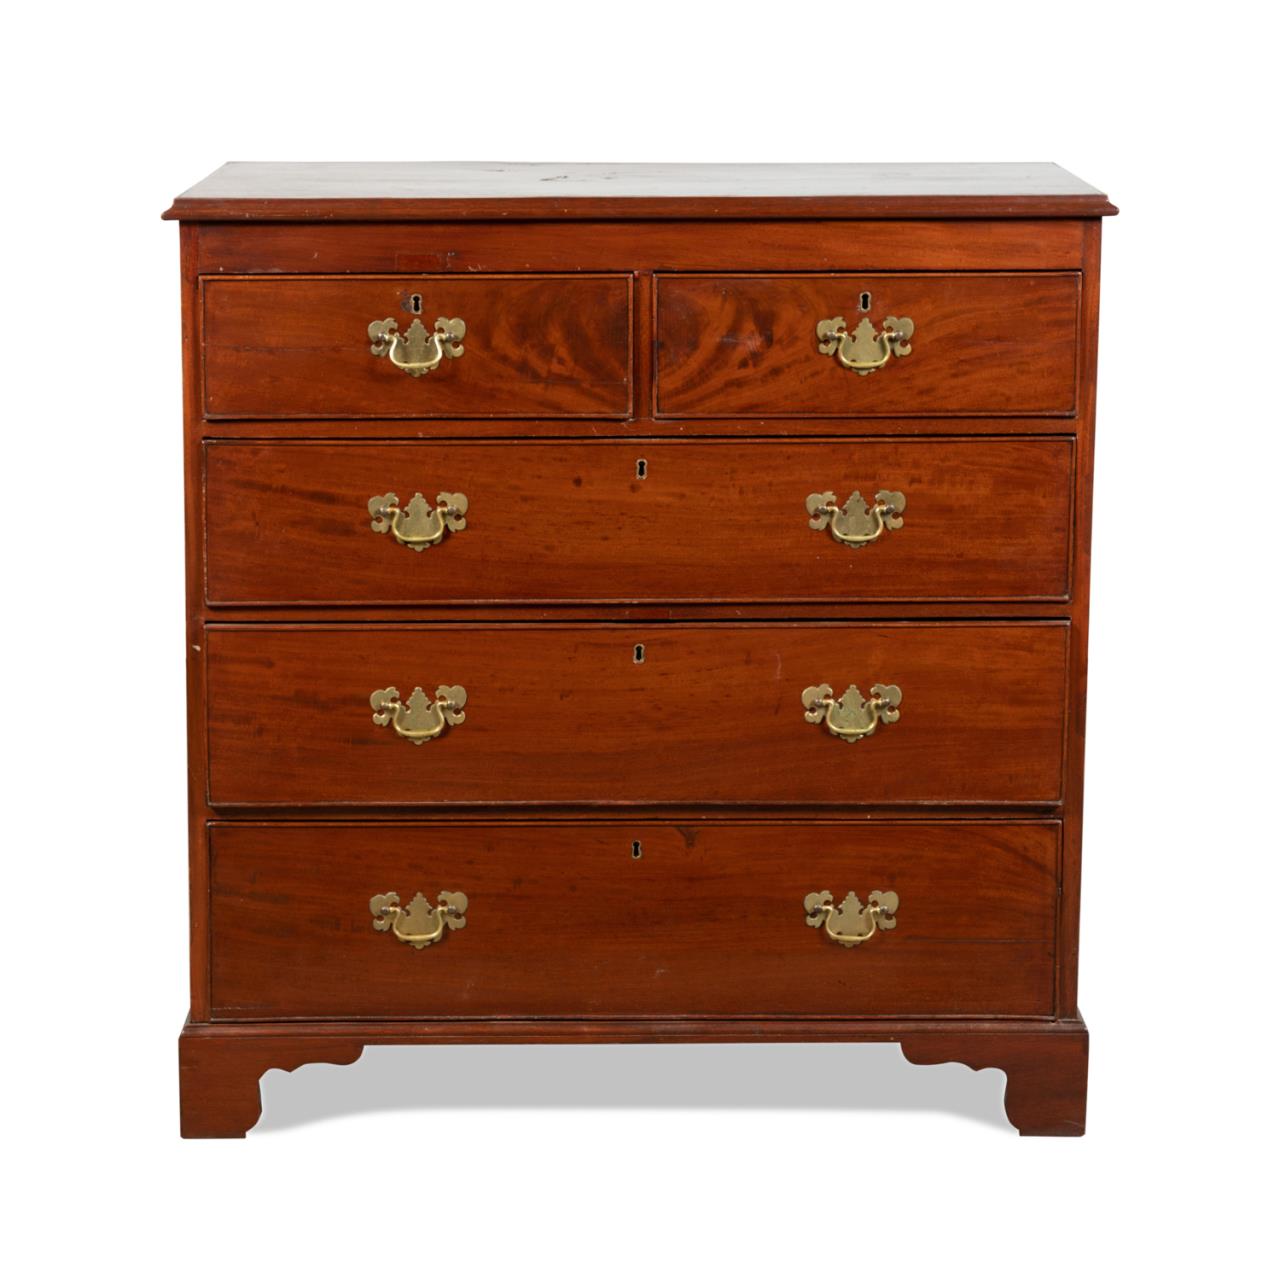 CHIPPENDALE STYLE MAHOGANY FIVE 2889c4